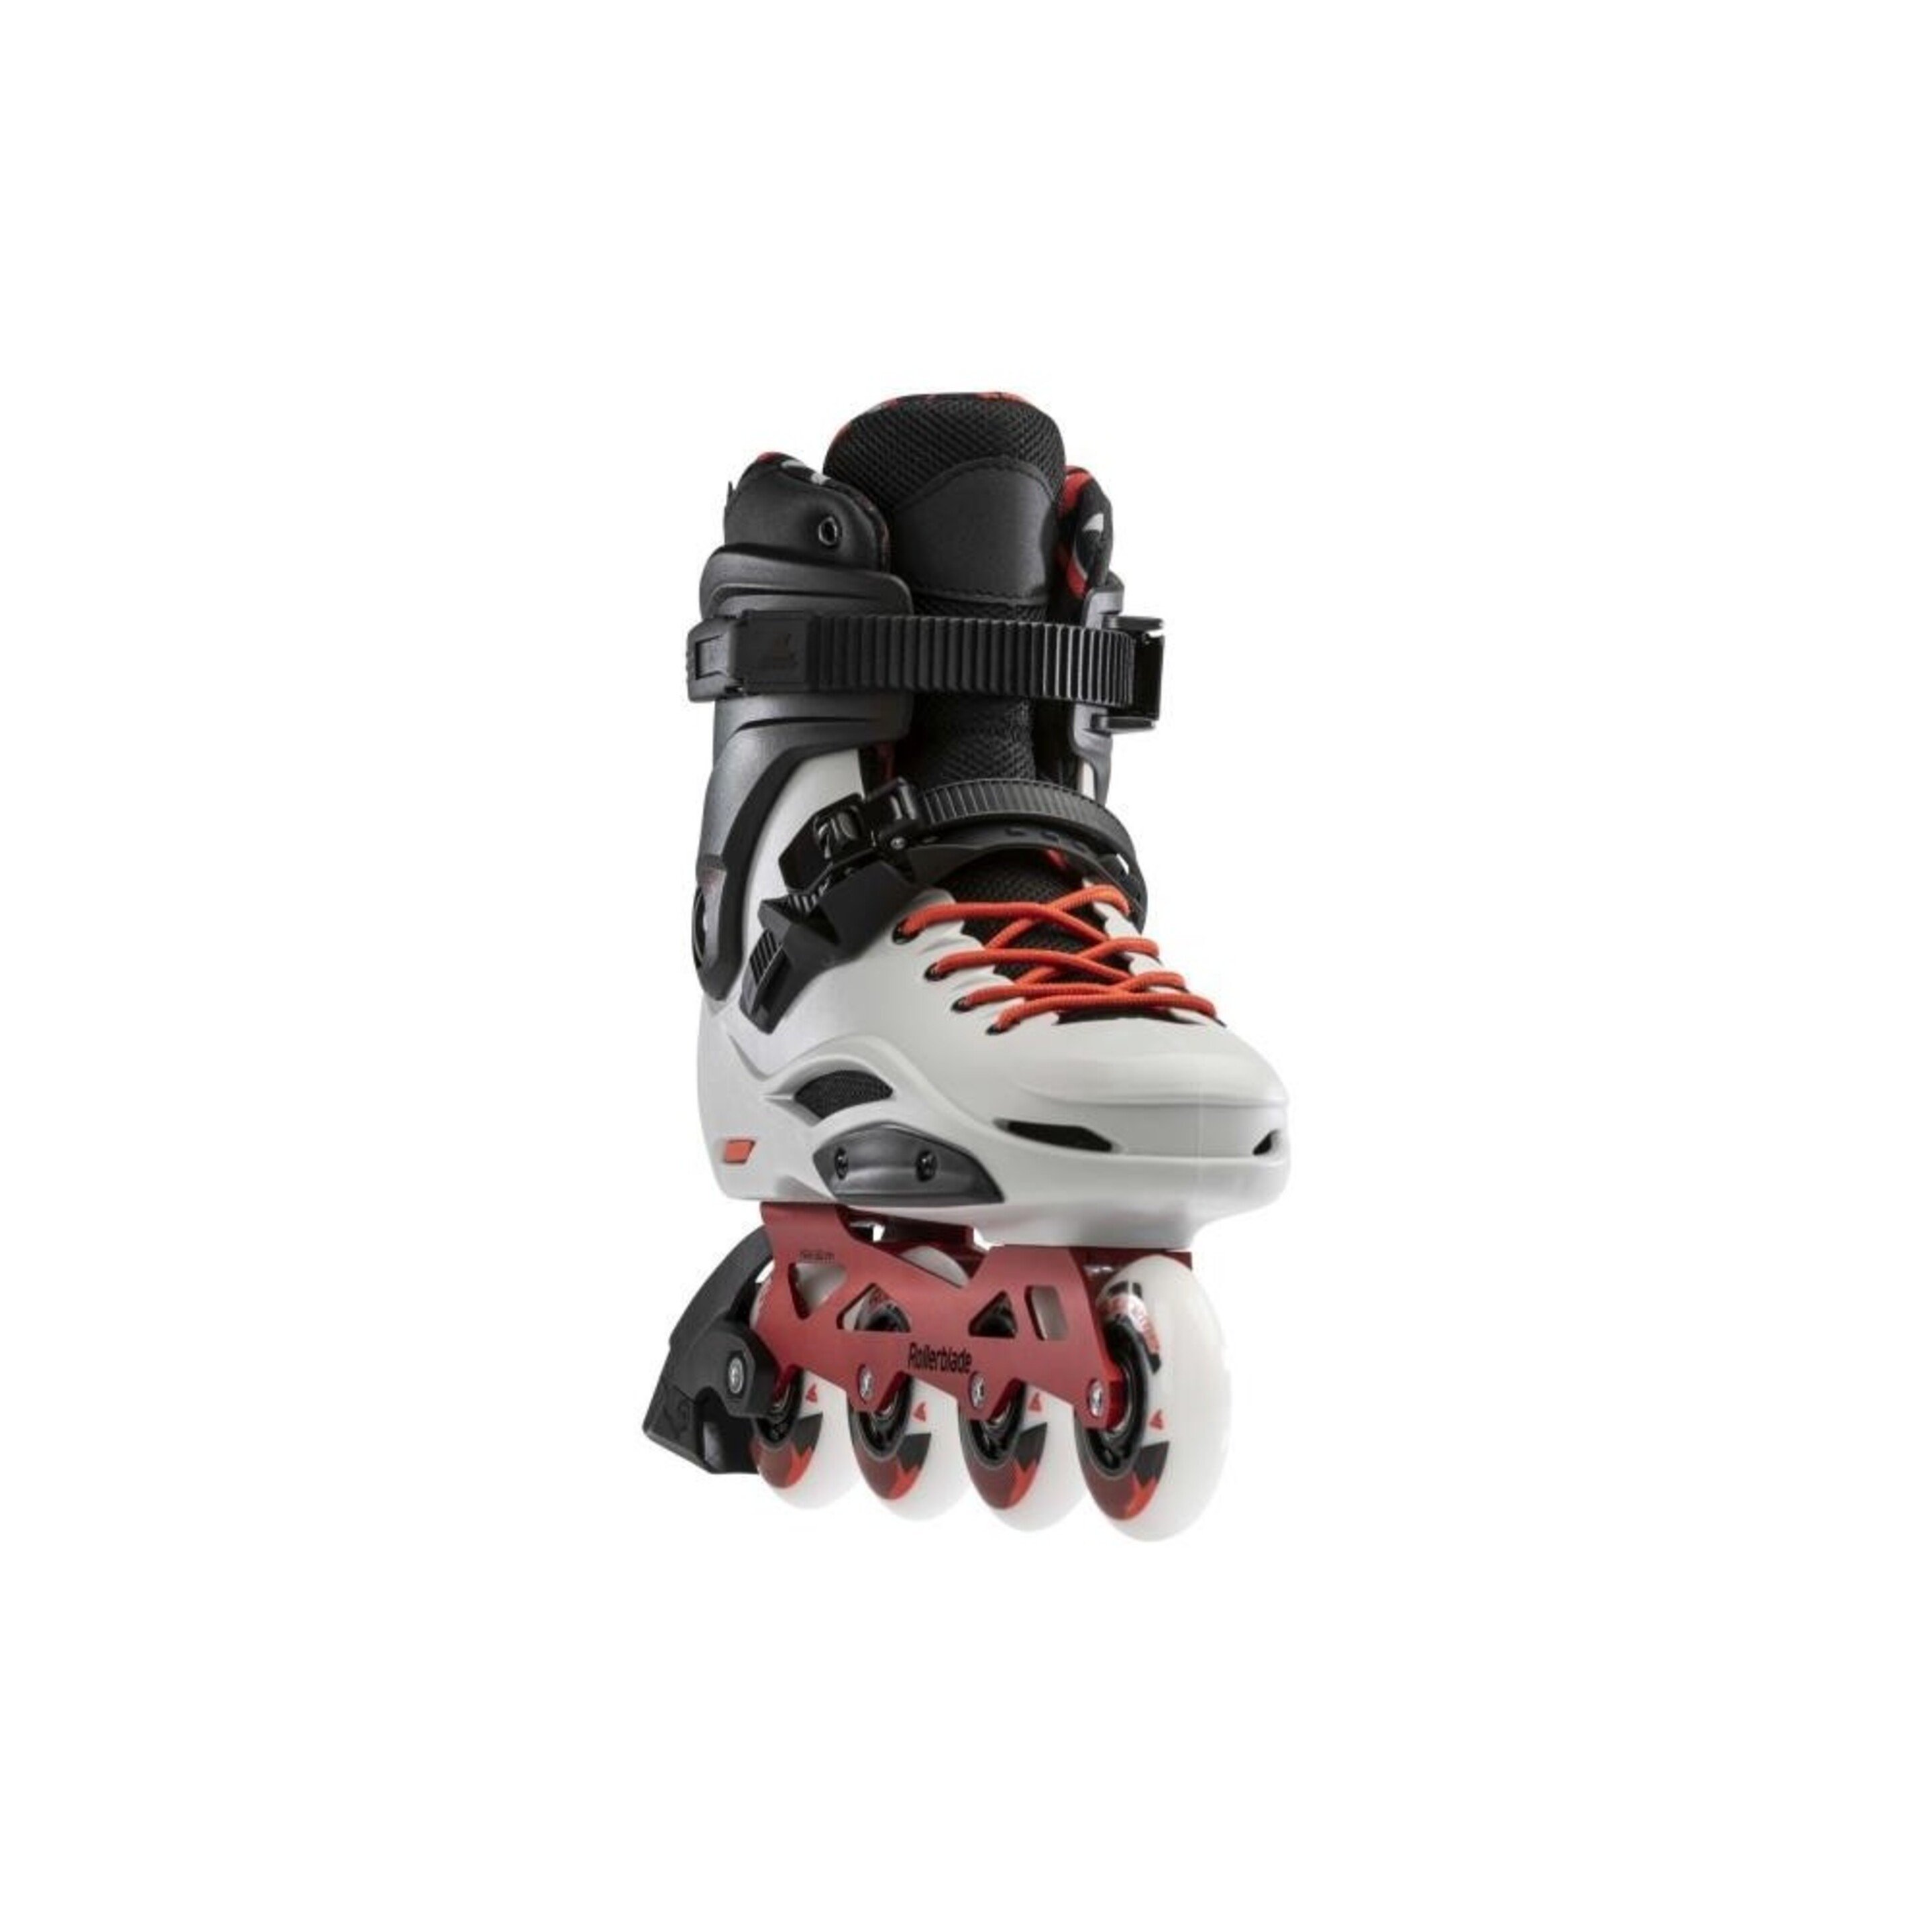 Patins Rollerblade Rb Pro X